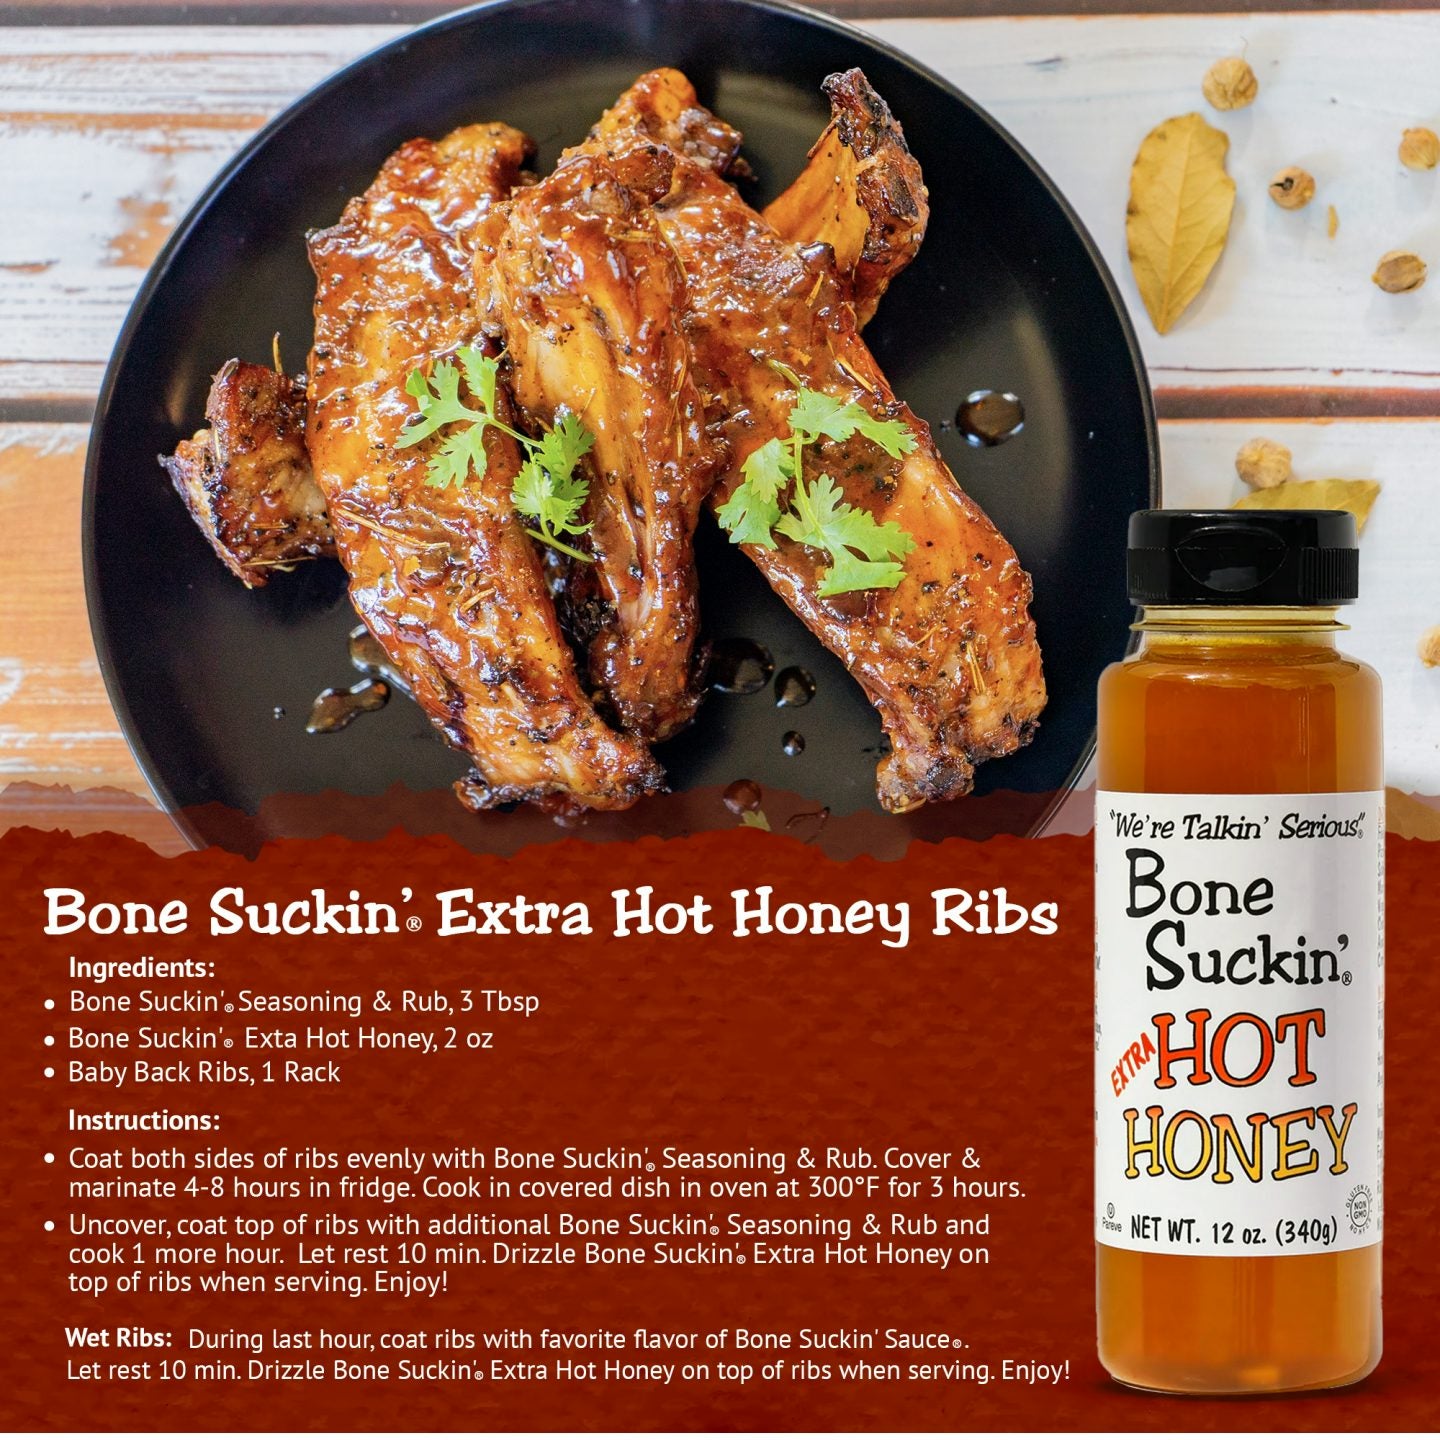 Bone Suckin' Extra Hot Honey Ribs. Ingredients: Bone Suckin' Seasoning & Rub, 3 tbsp. Bone Suckin' Extra Hot Honey, 2 oz. Baby back ribs, 1 rack. Instructions: Coat both sides of ribs with Bone Suckin' Seasoning & Rub. Cover & marinate 4-8 hours in fridge. Cook in covered dish in oven at 300 for 3 hours. Uncover, coat top of ribs with additional Bone Suckin' Seasoning & Rub. Cook 1 more hour. Let rest 10 min. Drizzle Bone Suckin' Extra Hot Honey on top of ribs when serving. Enjoy!